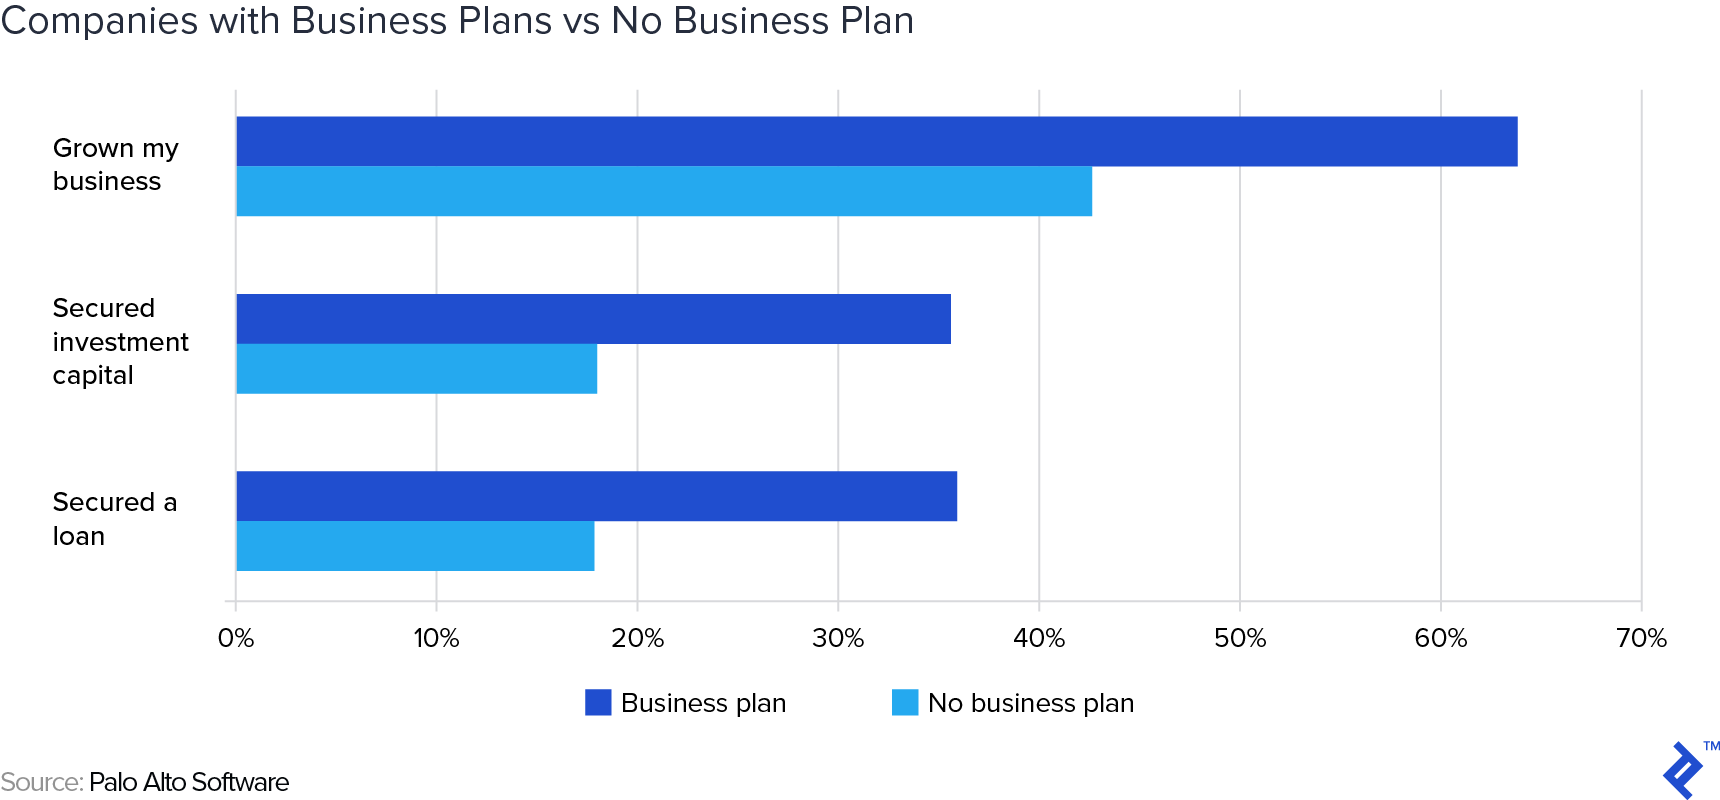 A chart comparing elements of companies with business plans to companies with no business plan